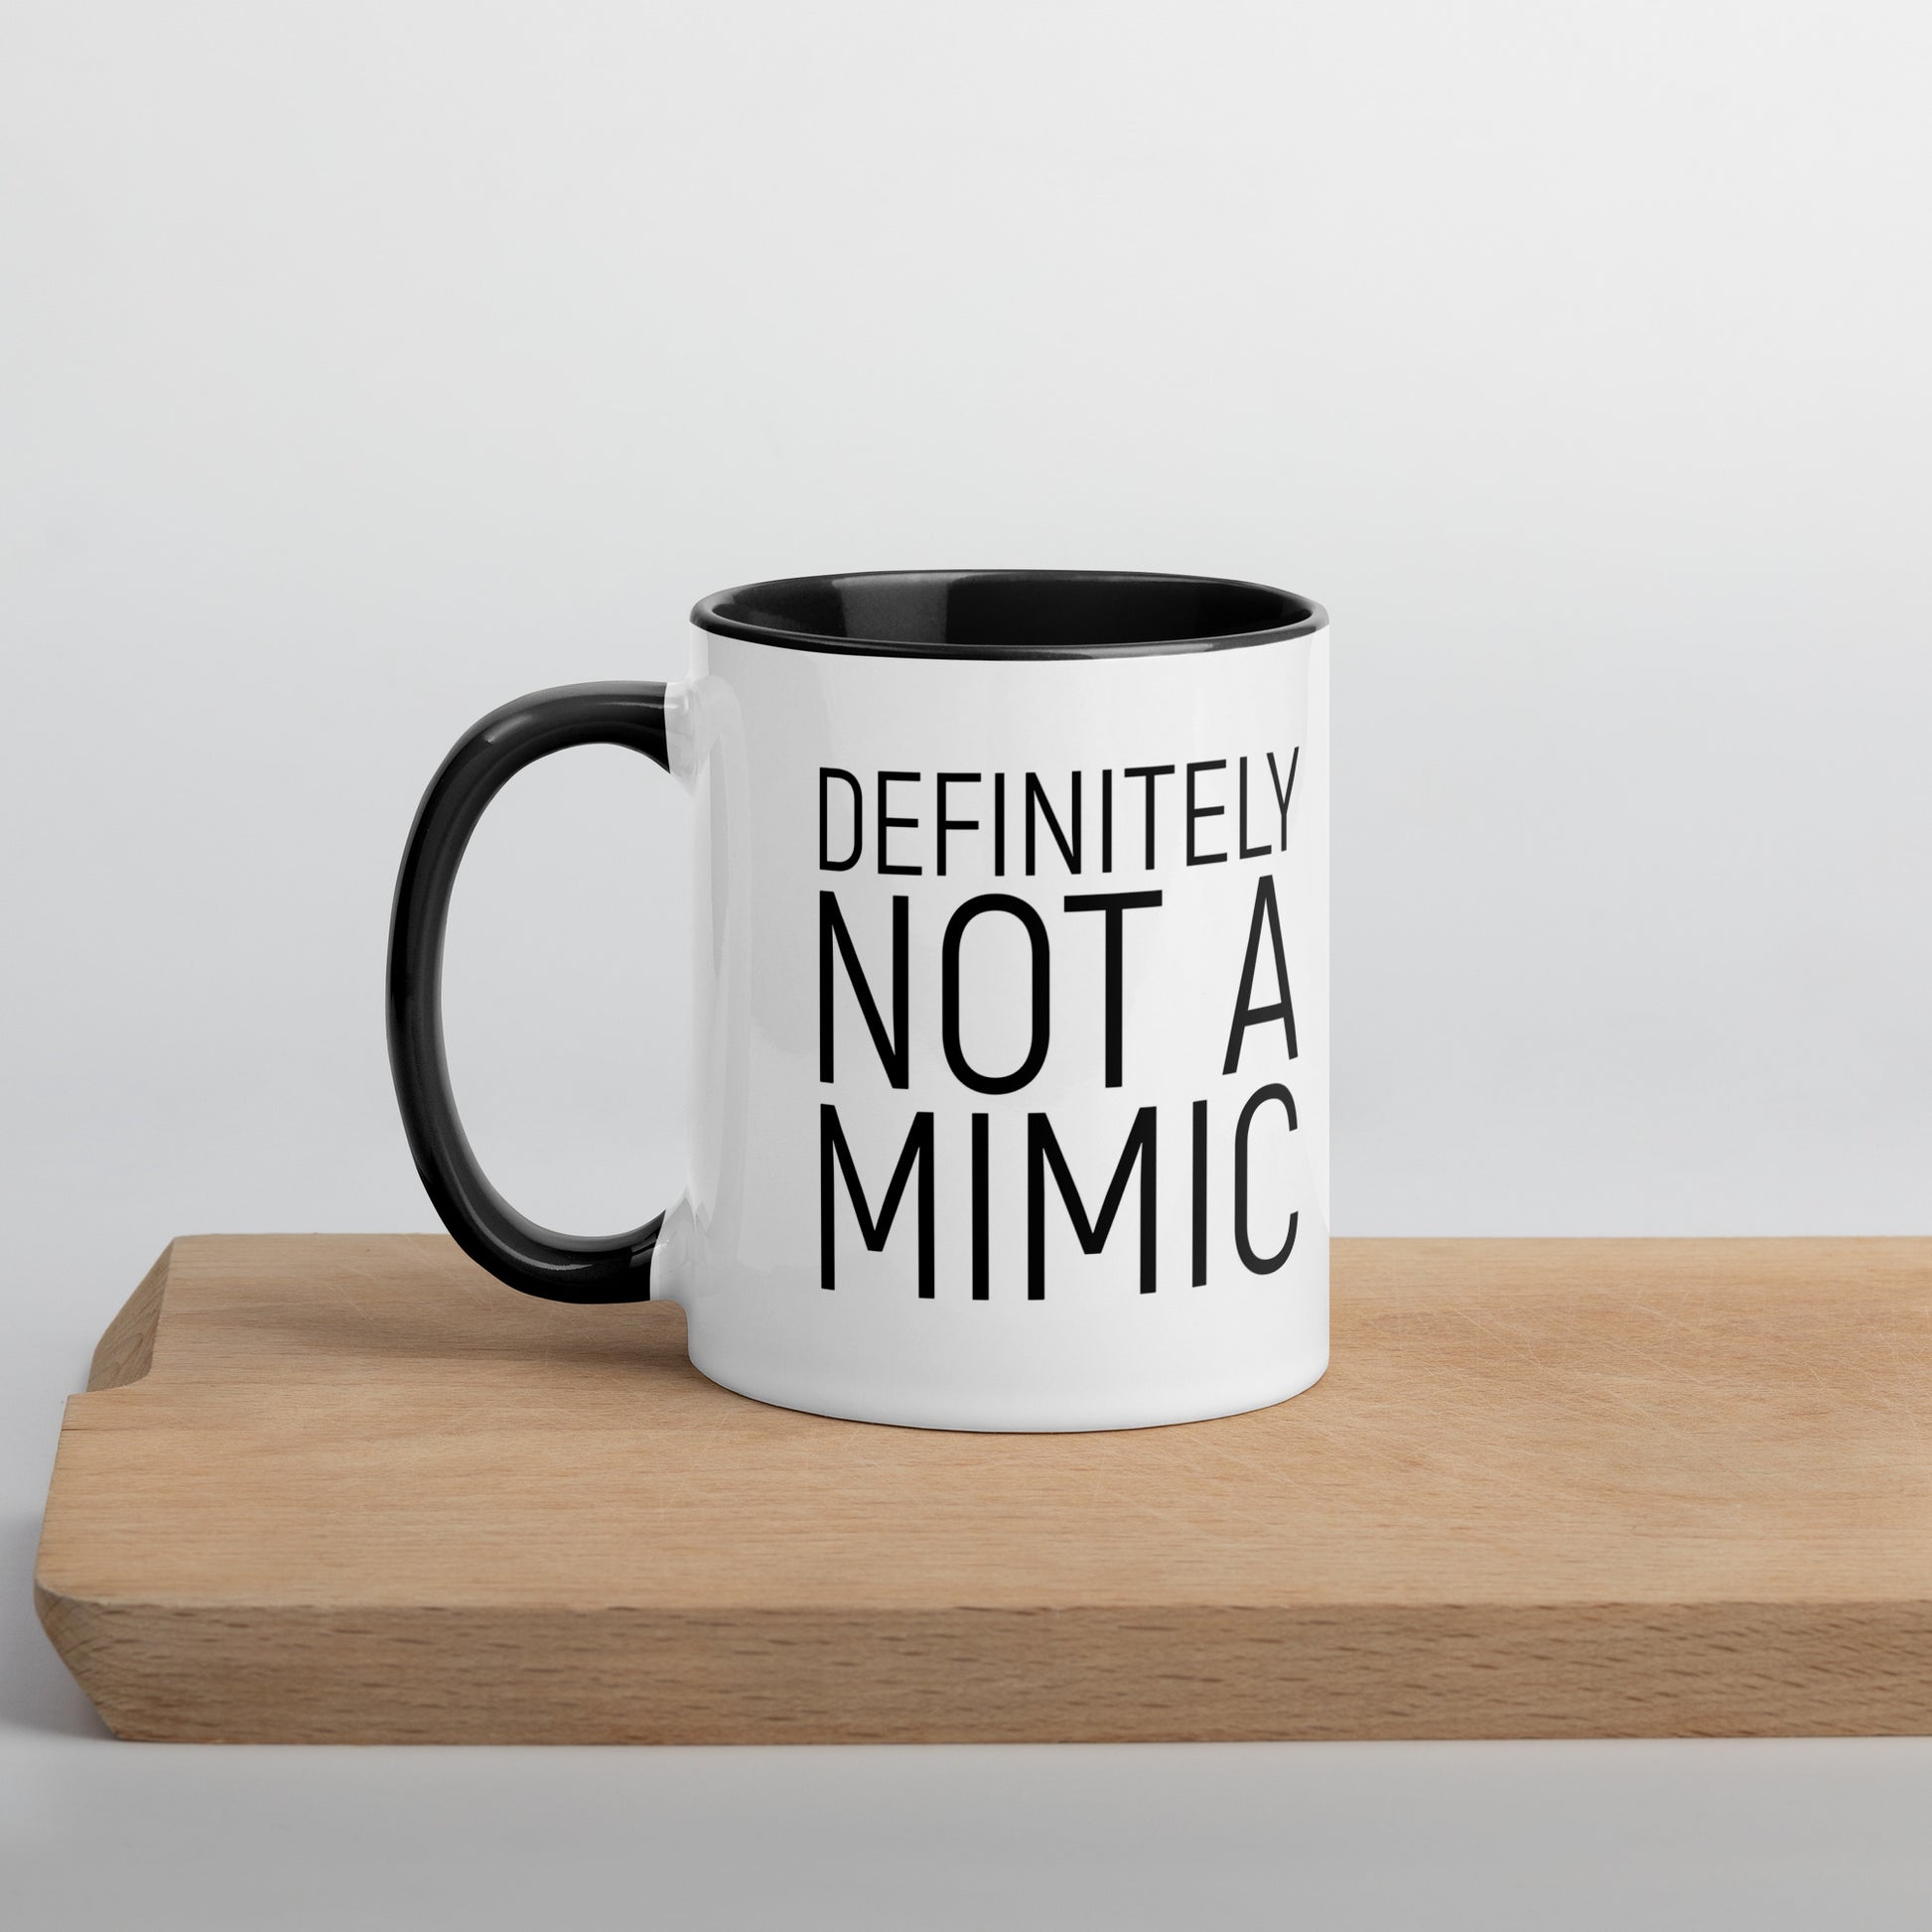 Definitely NOT a Mimic Double sided Mug with Color Inside  Level 1 Gamers Black 11oz 